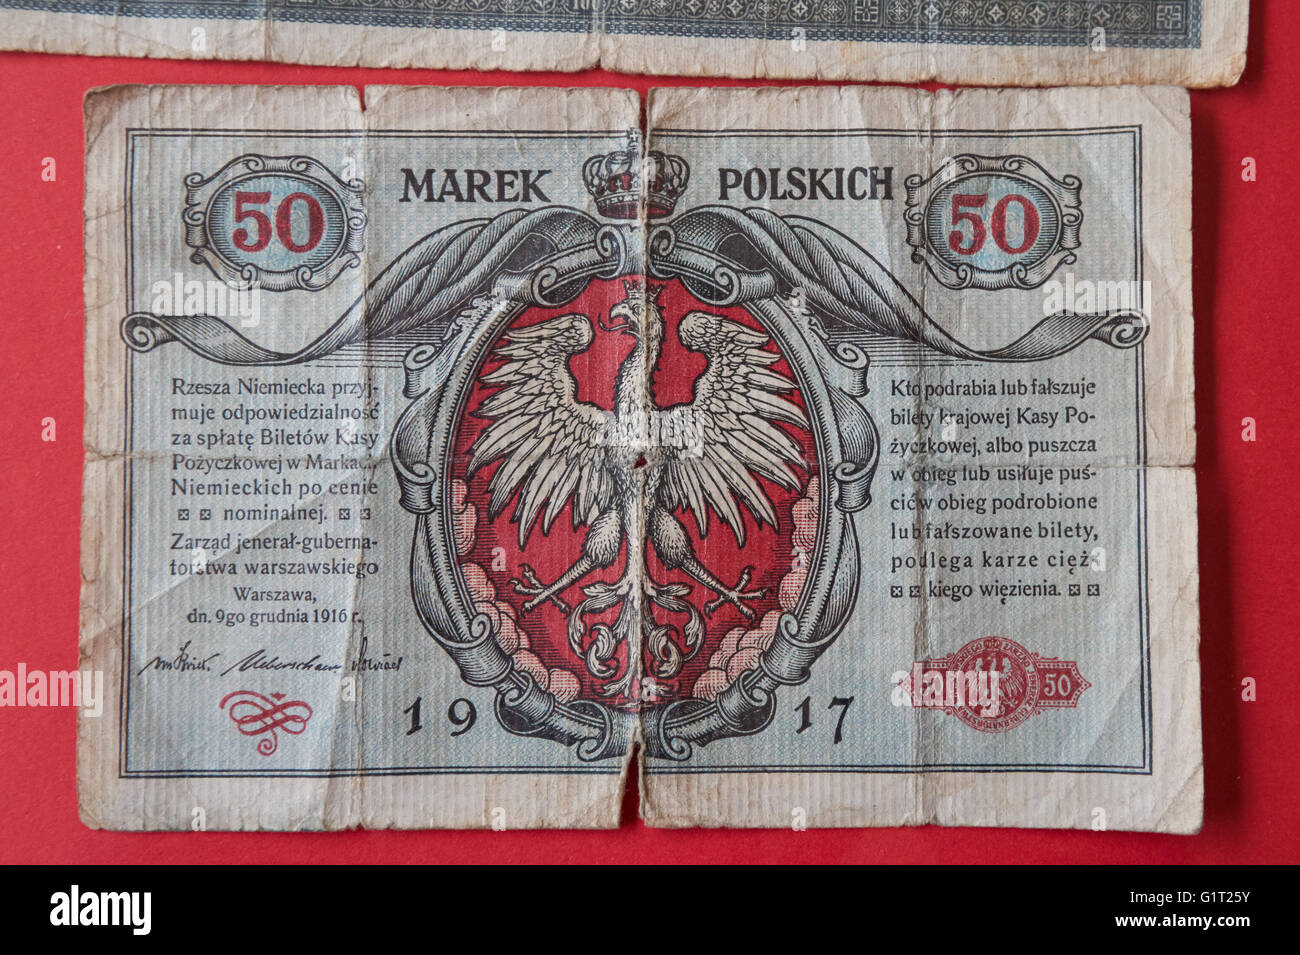 50 Polish marks banknote from 1917 in Diocesan Museum in Plock Poland Stock Photo